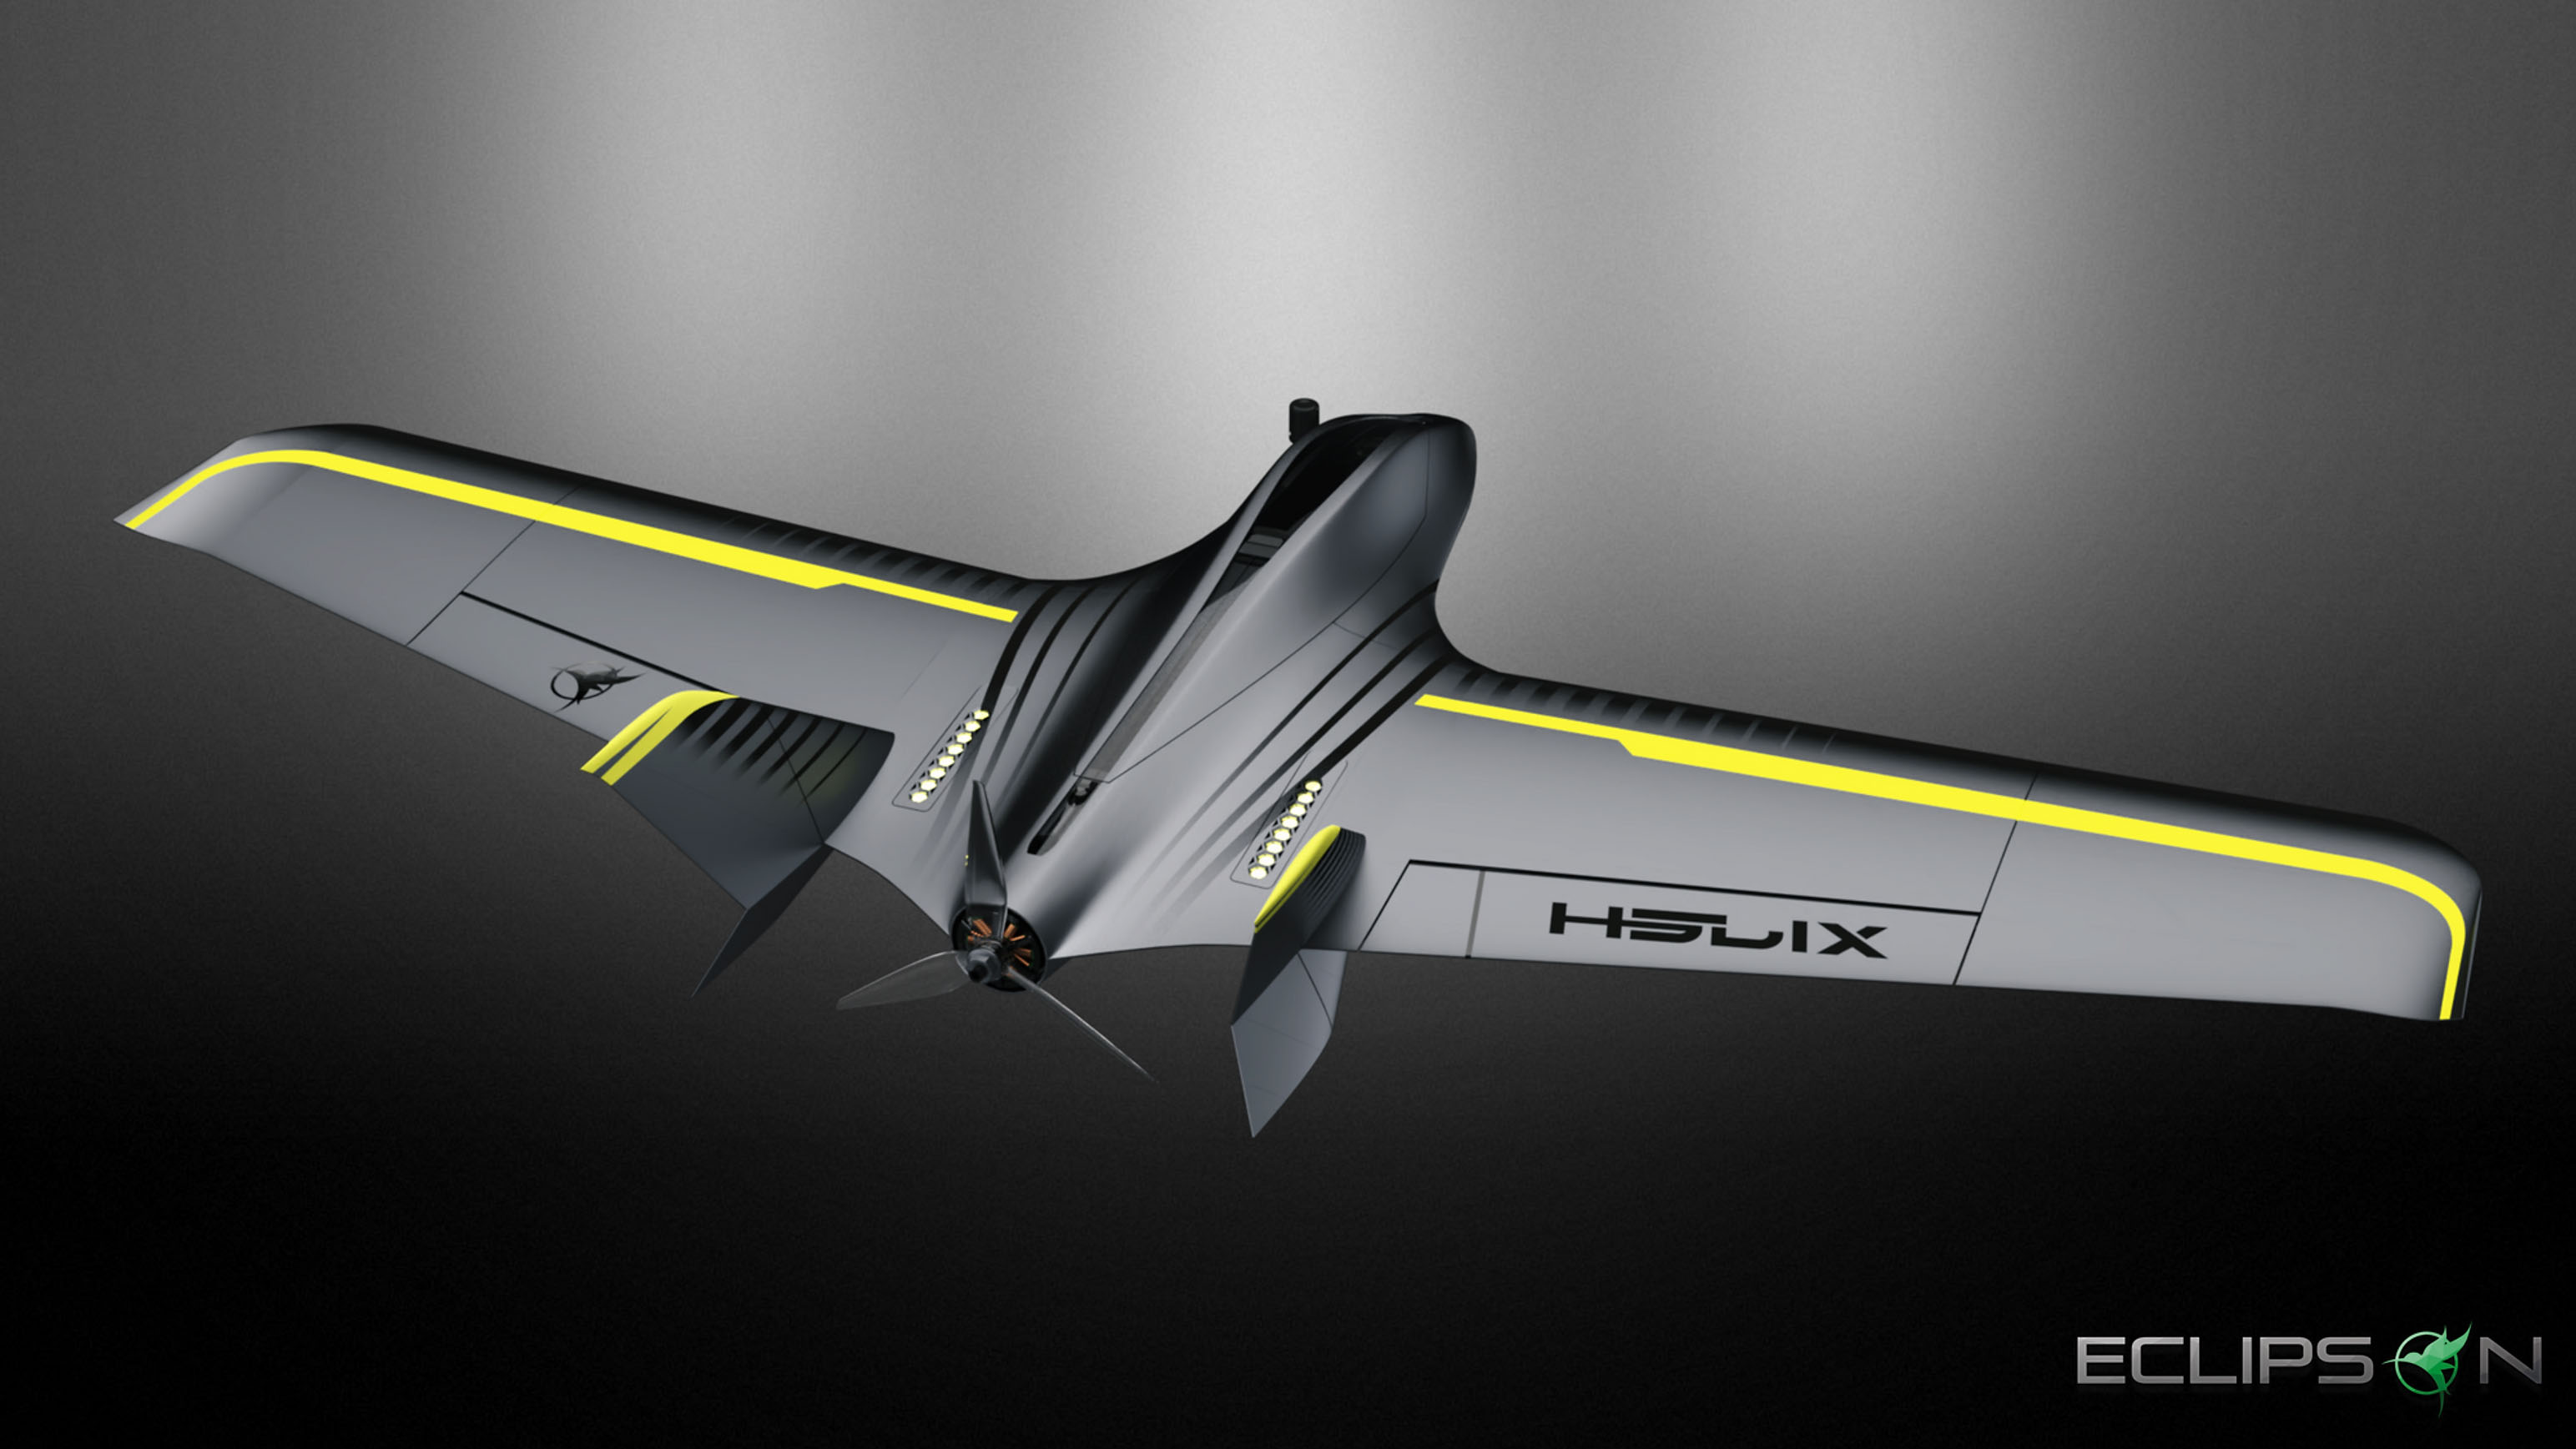 Helix Eclipson Airplanes